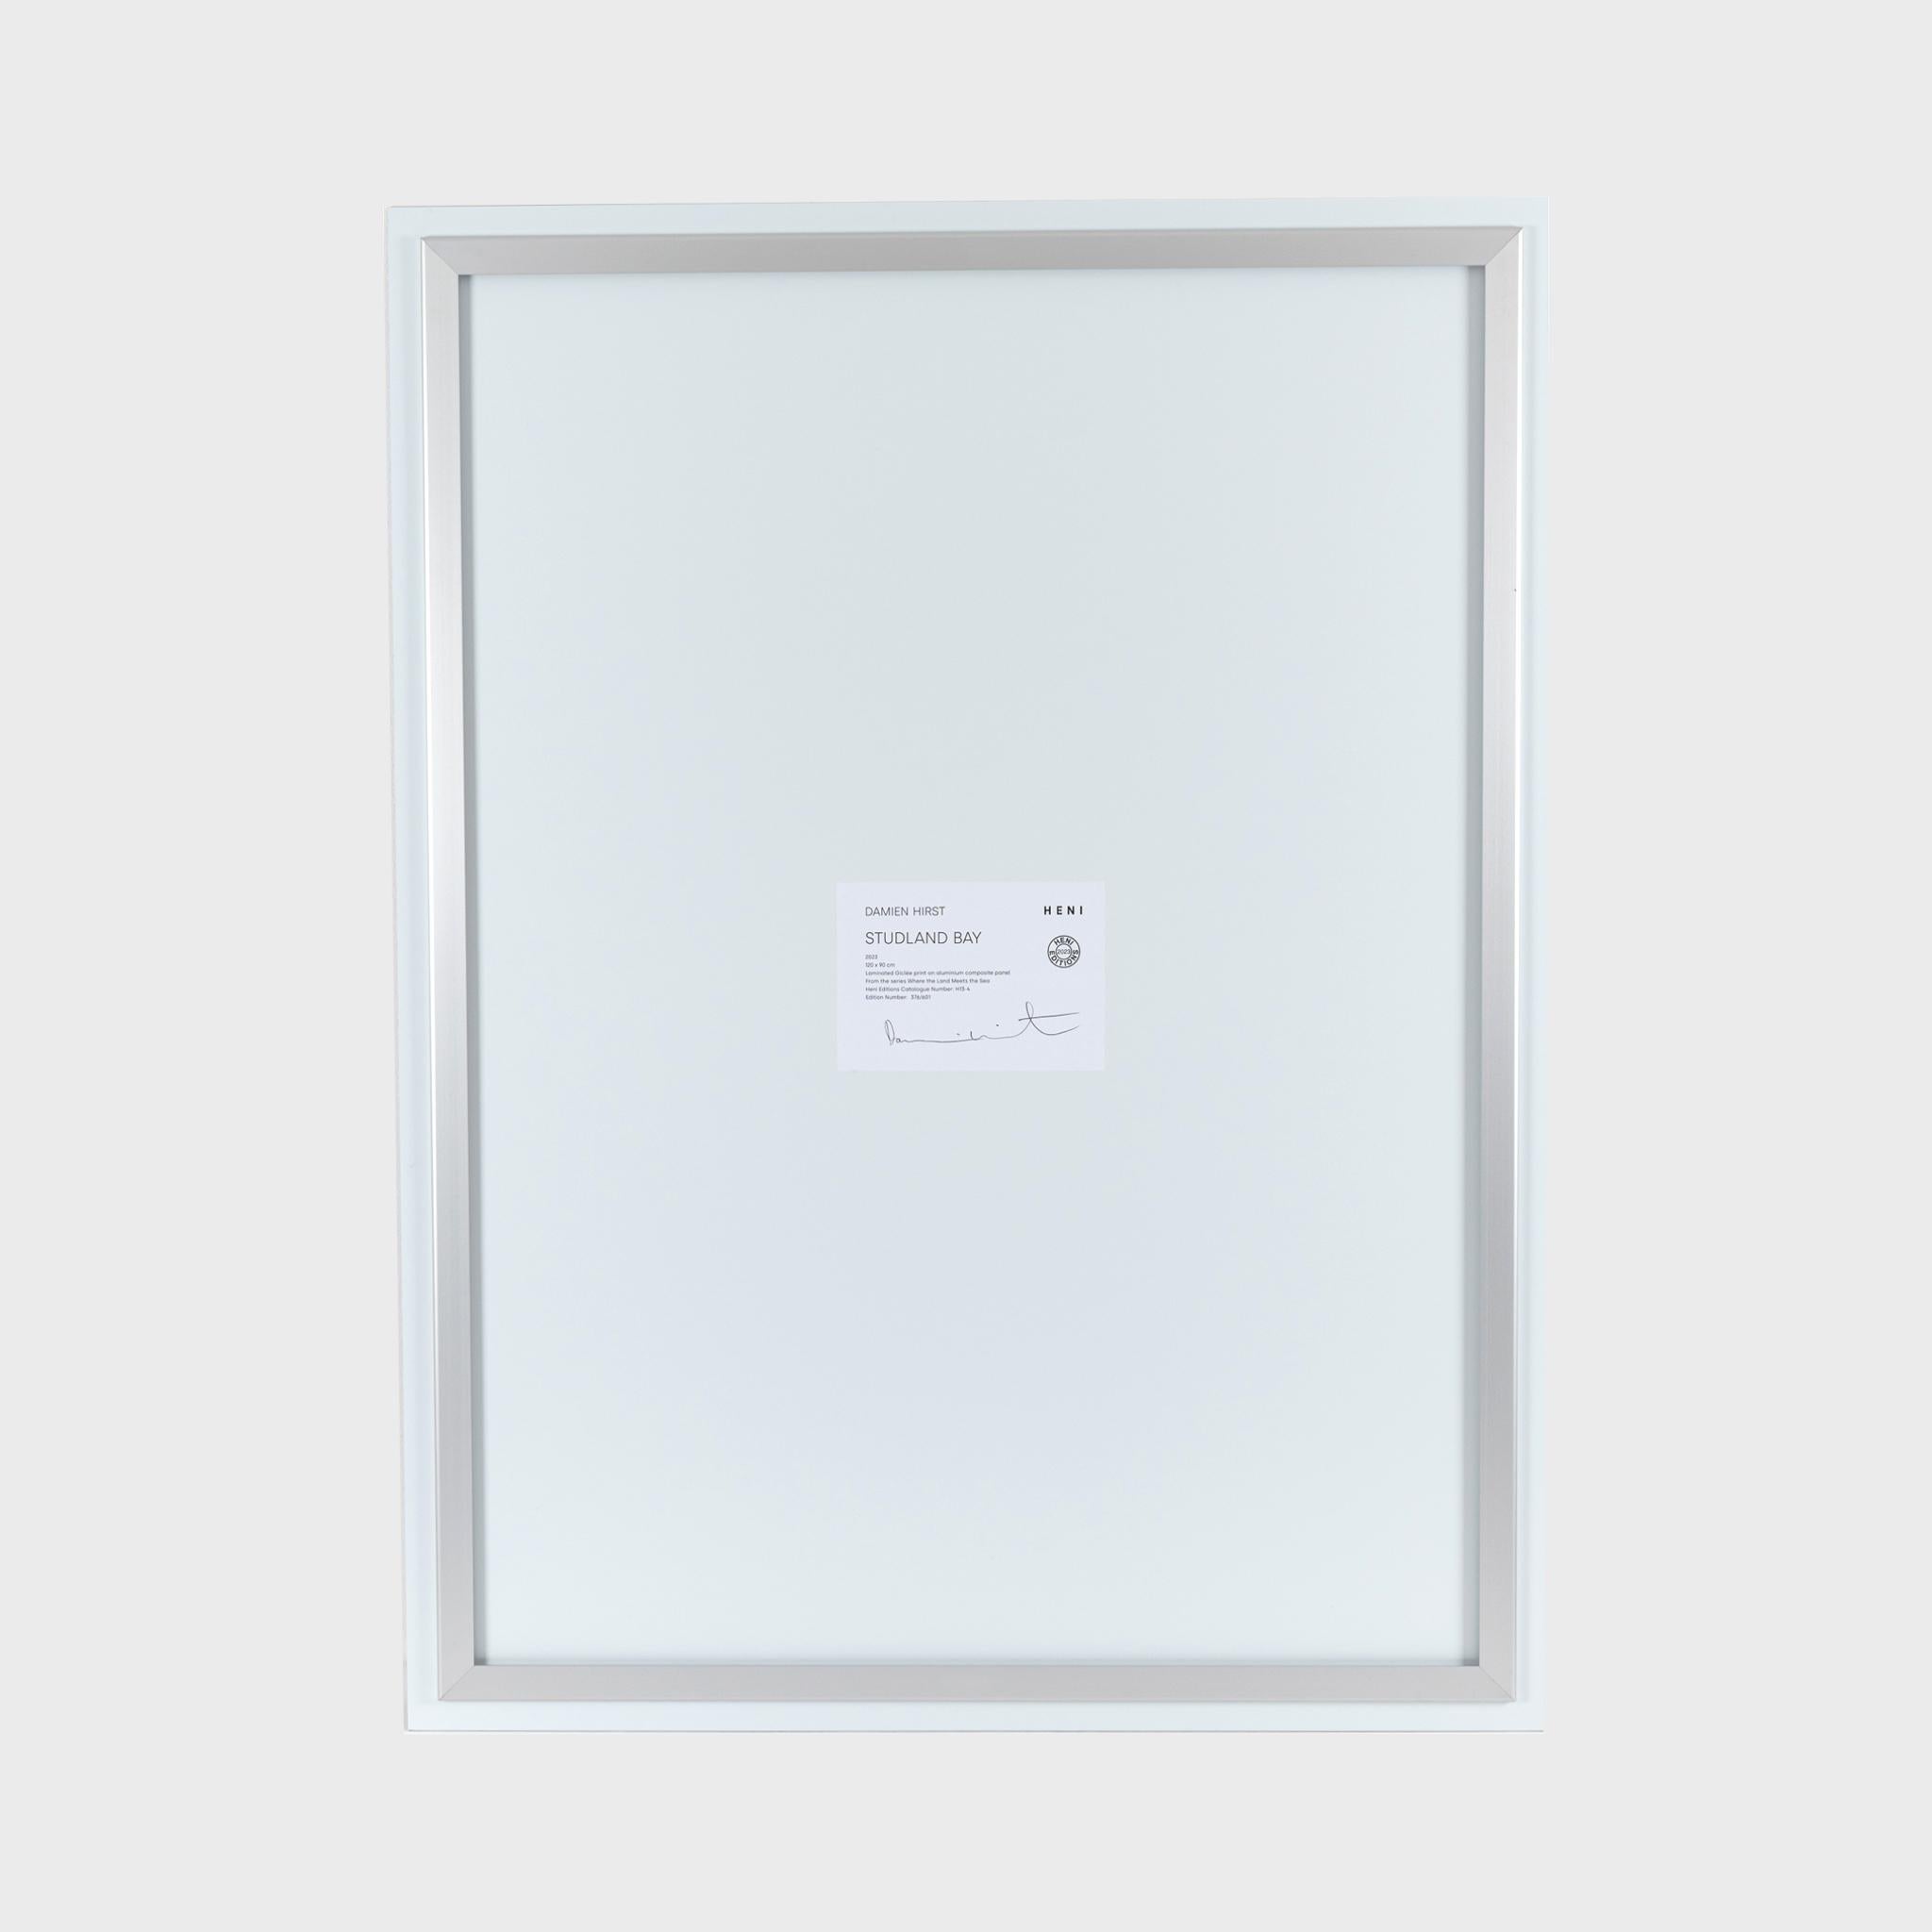 H13-4 Studland Bay (from Where the Land Meets the Sea) - Print by Damien Hirst